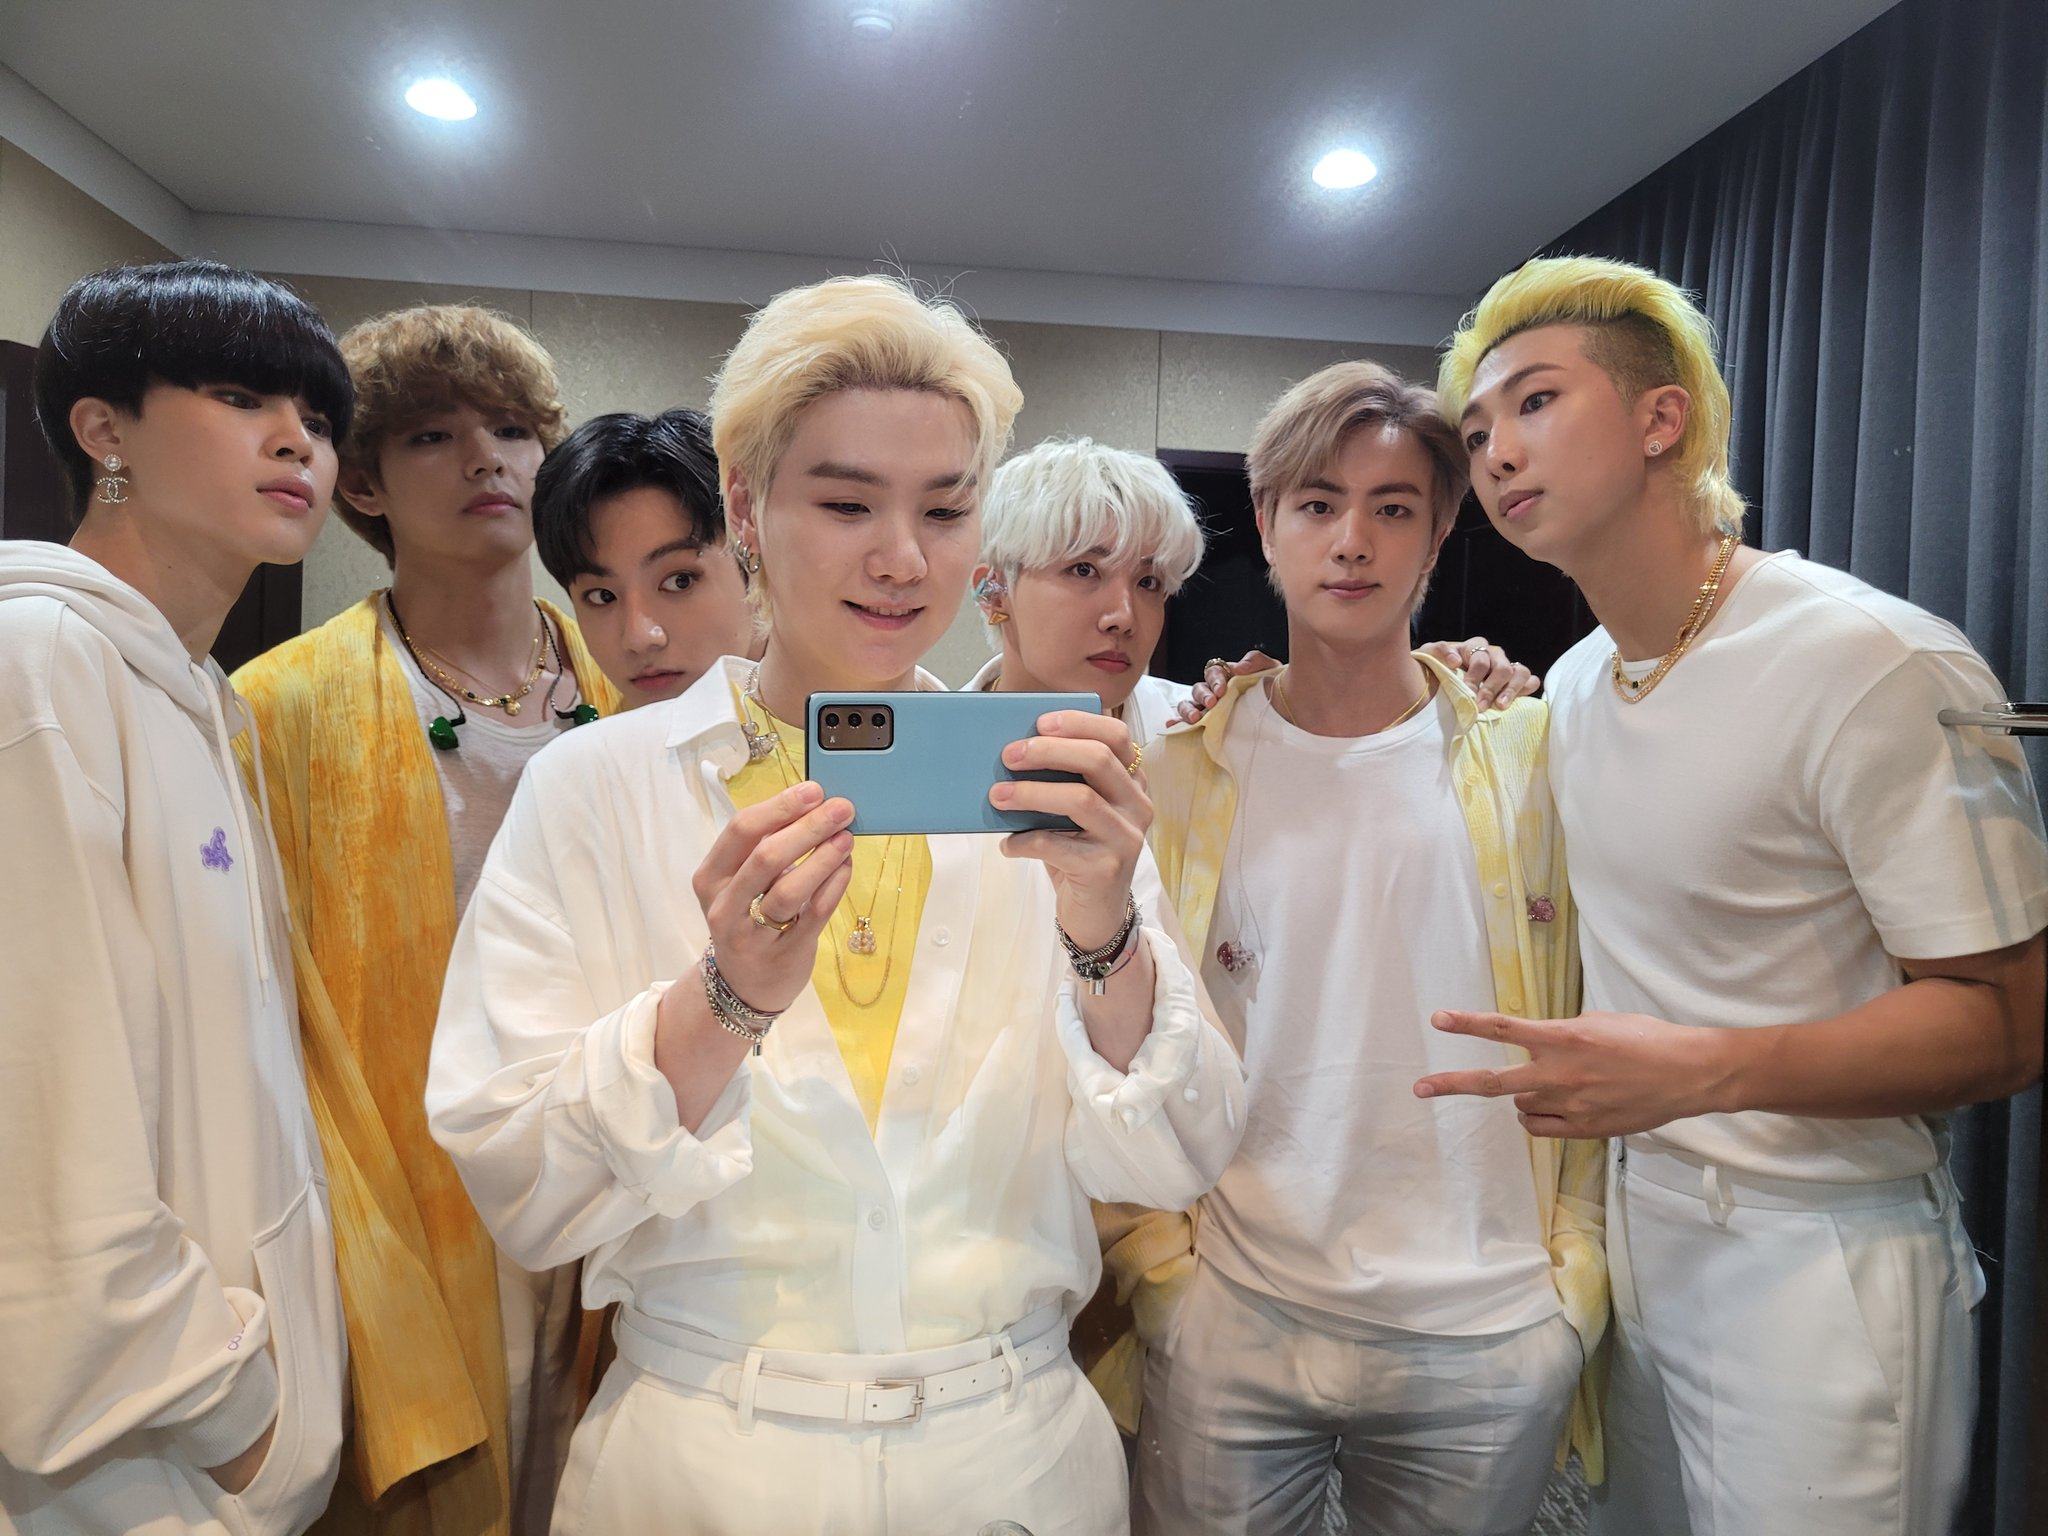 ENHYPEN Interview July 2021: K-Pop Band New Music, Fans, Competition